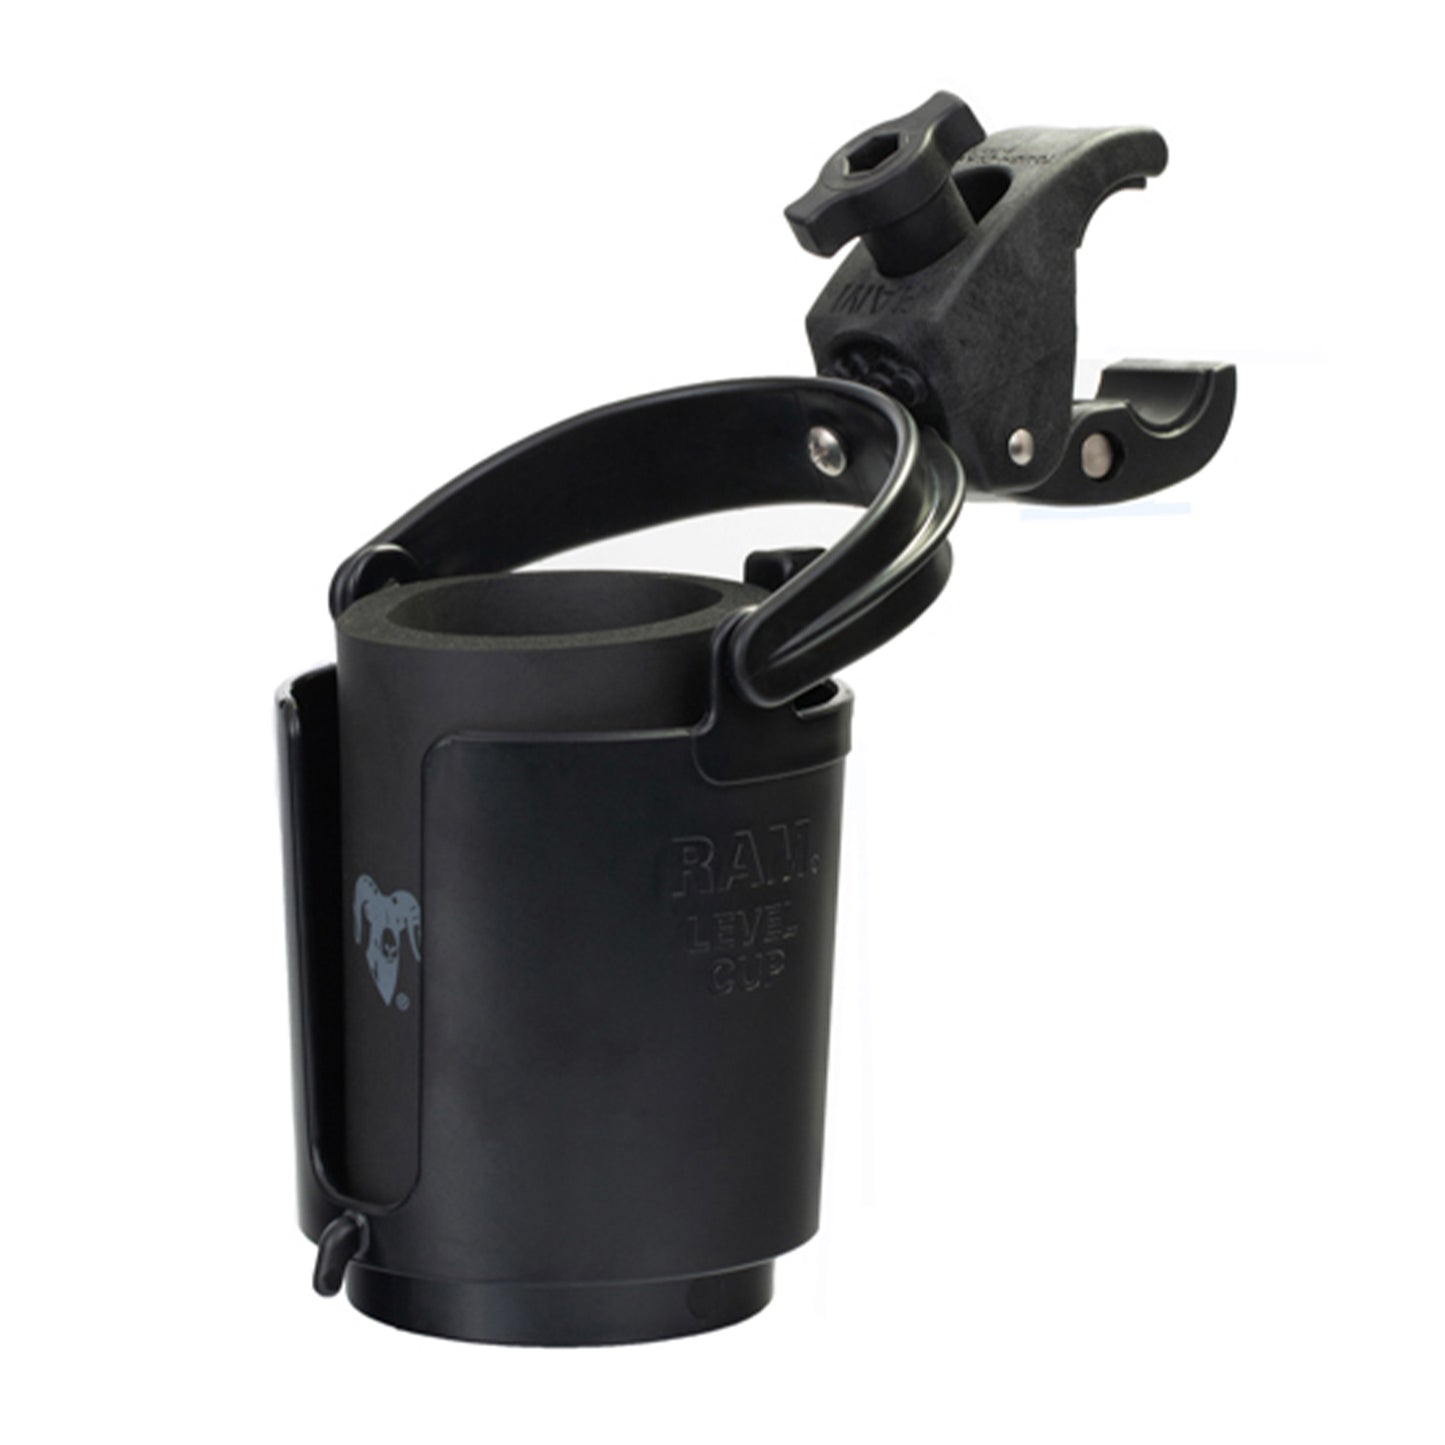 RAM Level Cup 16oz Drink Holder with RAM Tough-Claw Mount - 15-08148